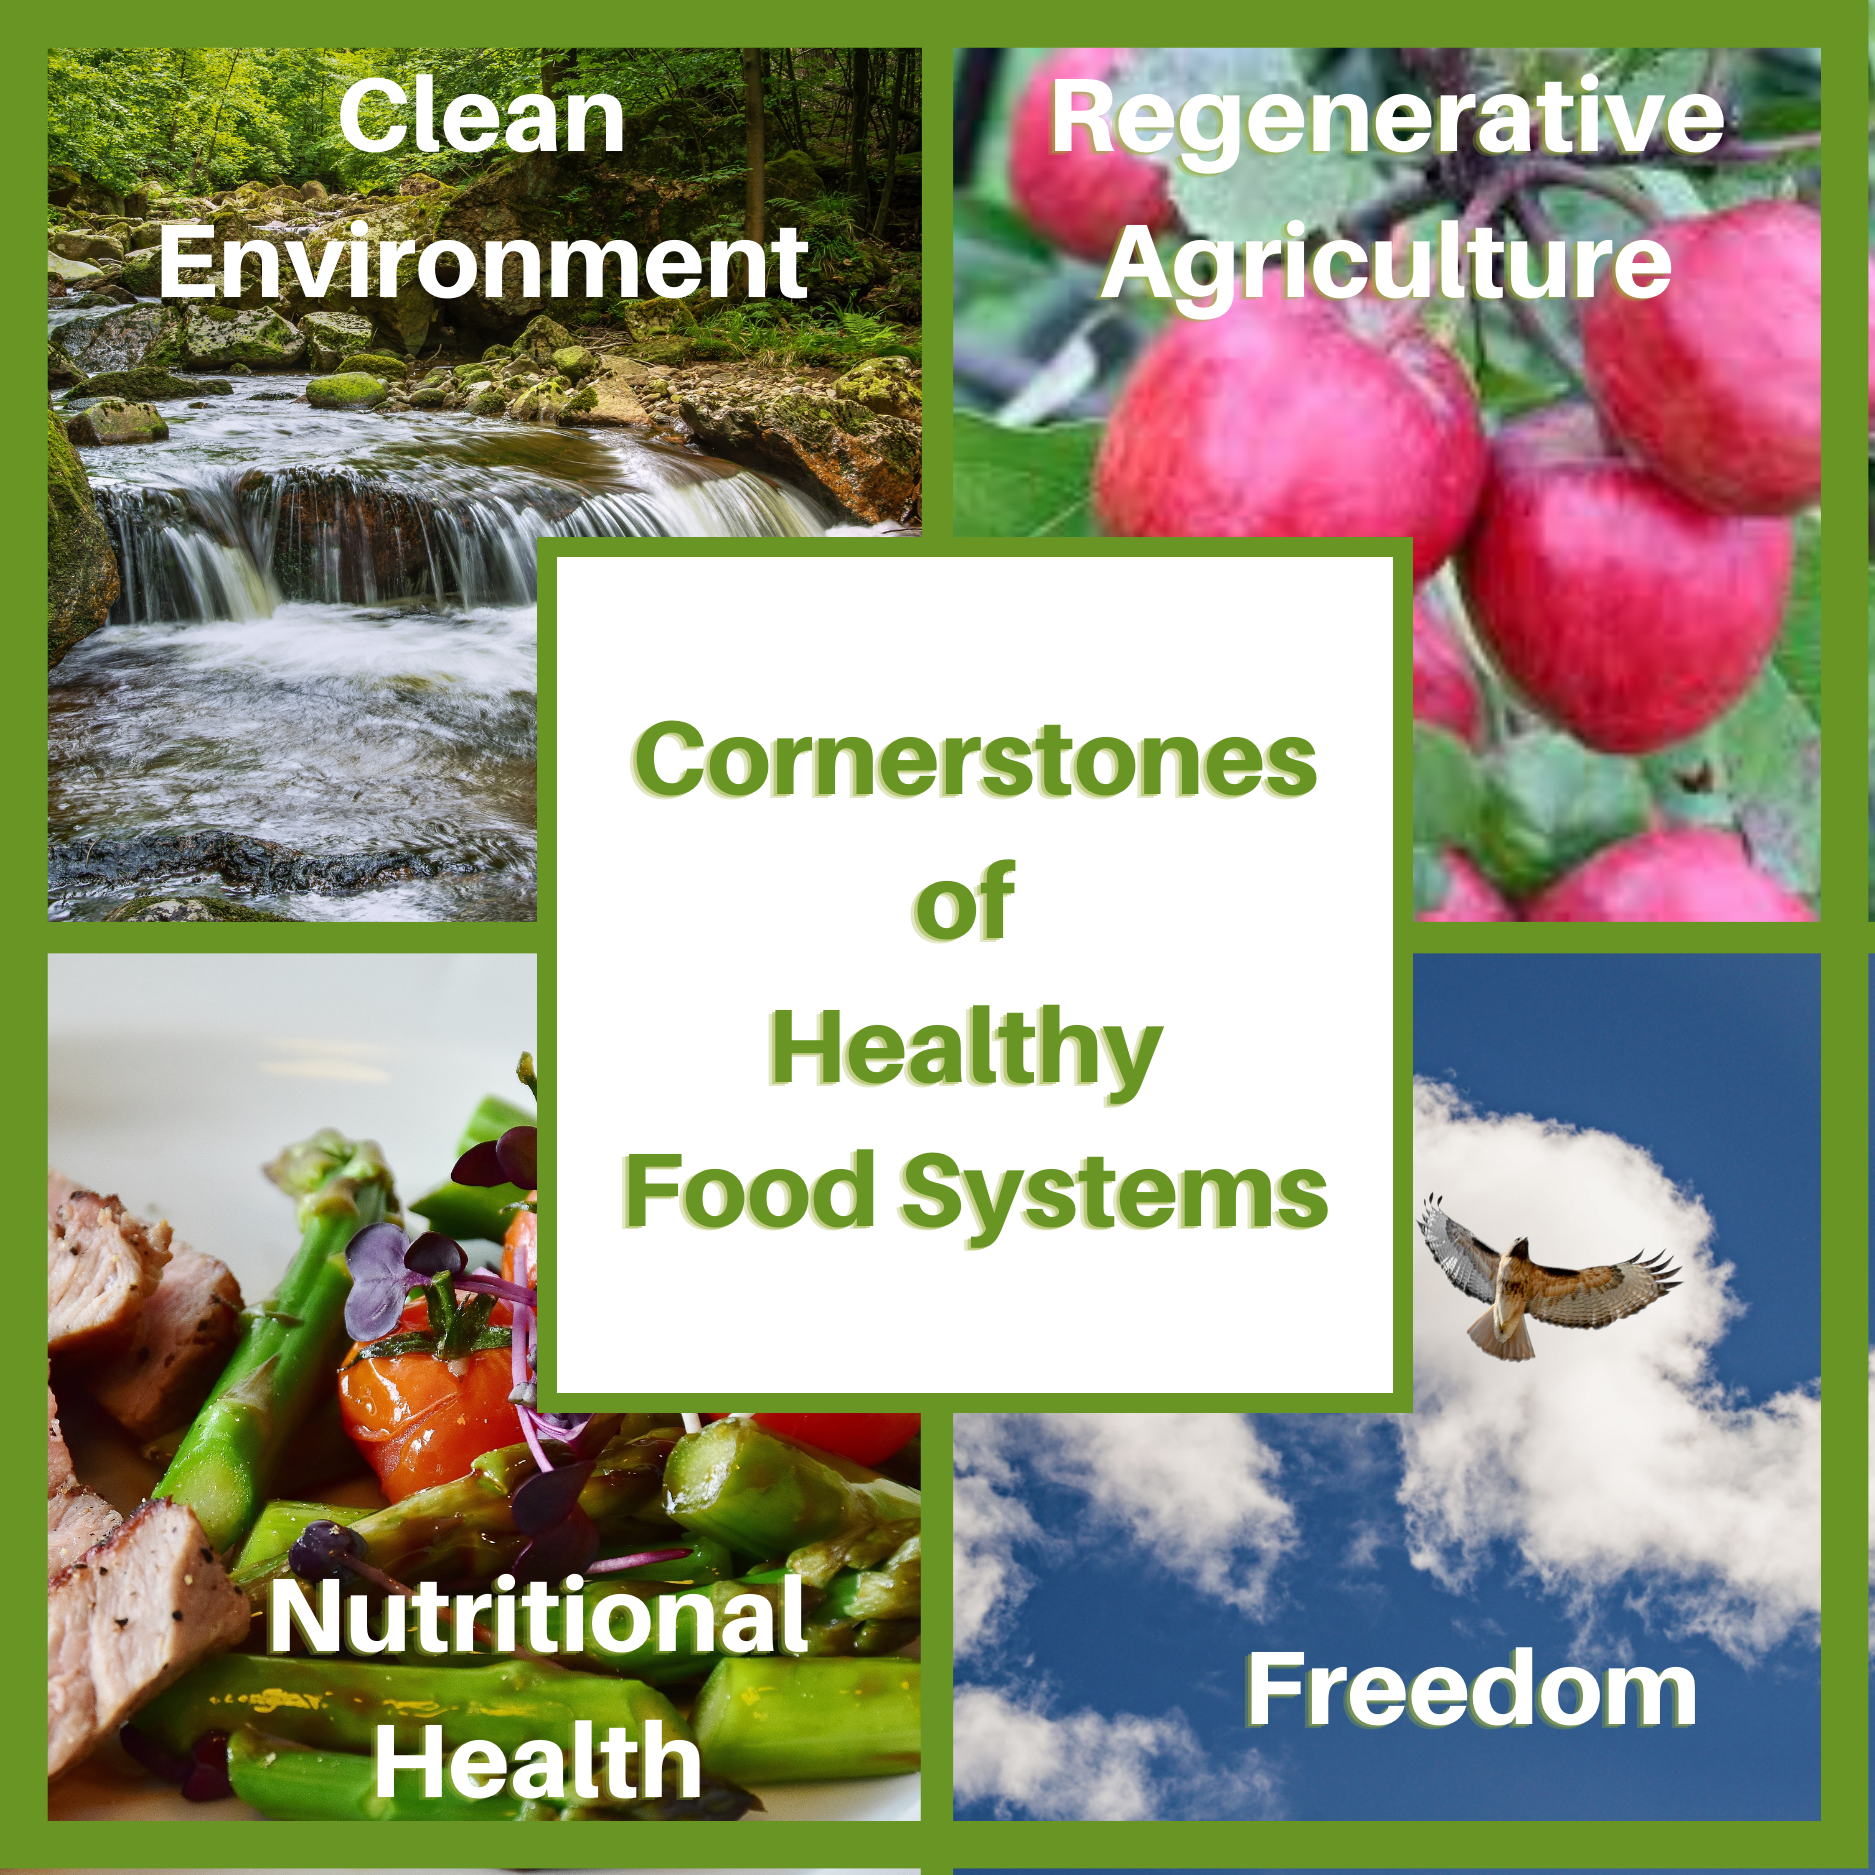 Image shows a model of healthy food systems based on 4 cornerstones of a clean environment, regenerative agriculture, nutritional health, and freedom.